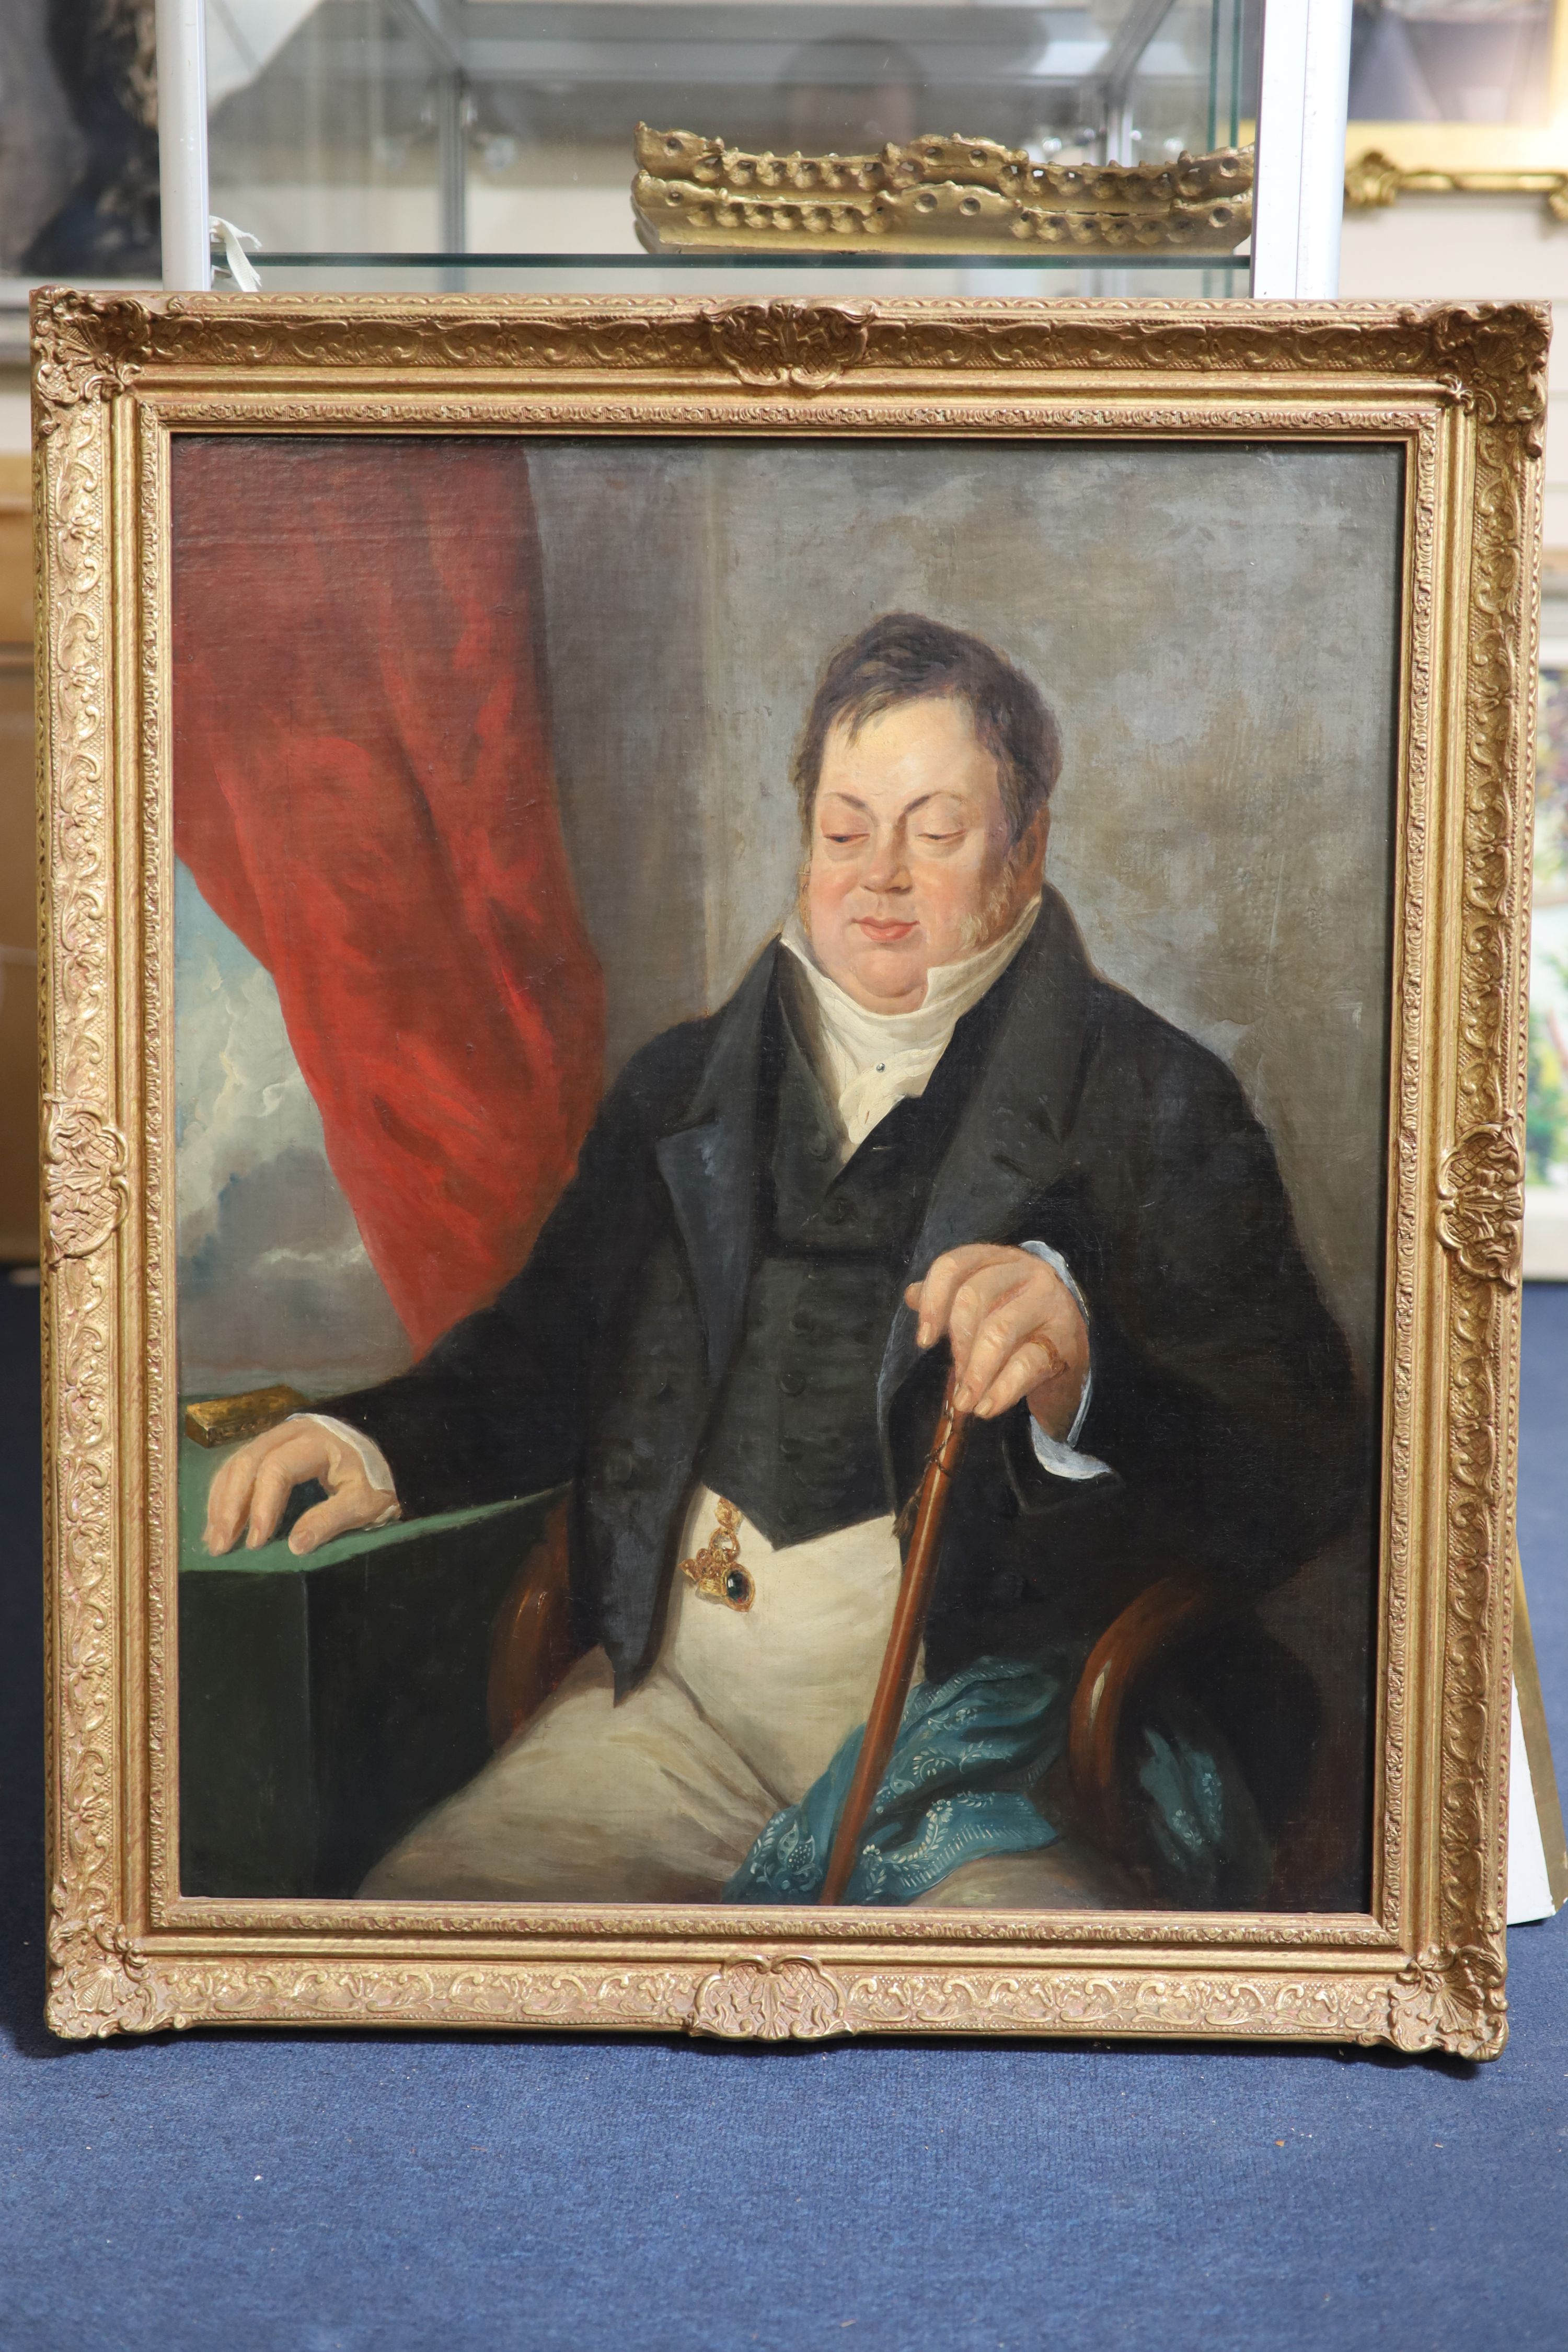 Attributed to Benjamin Marshall (1767-1848), Portrait of a seated portly gentleman, by repute, Samuel Vale (1797-1835), oil on canvas, 76 x 62.25cm